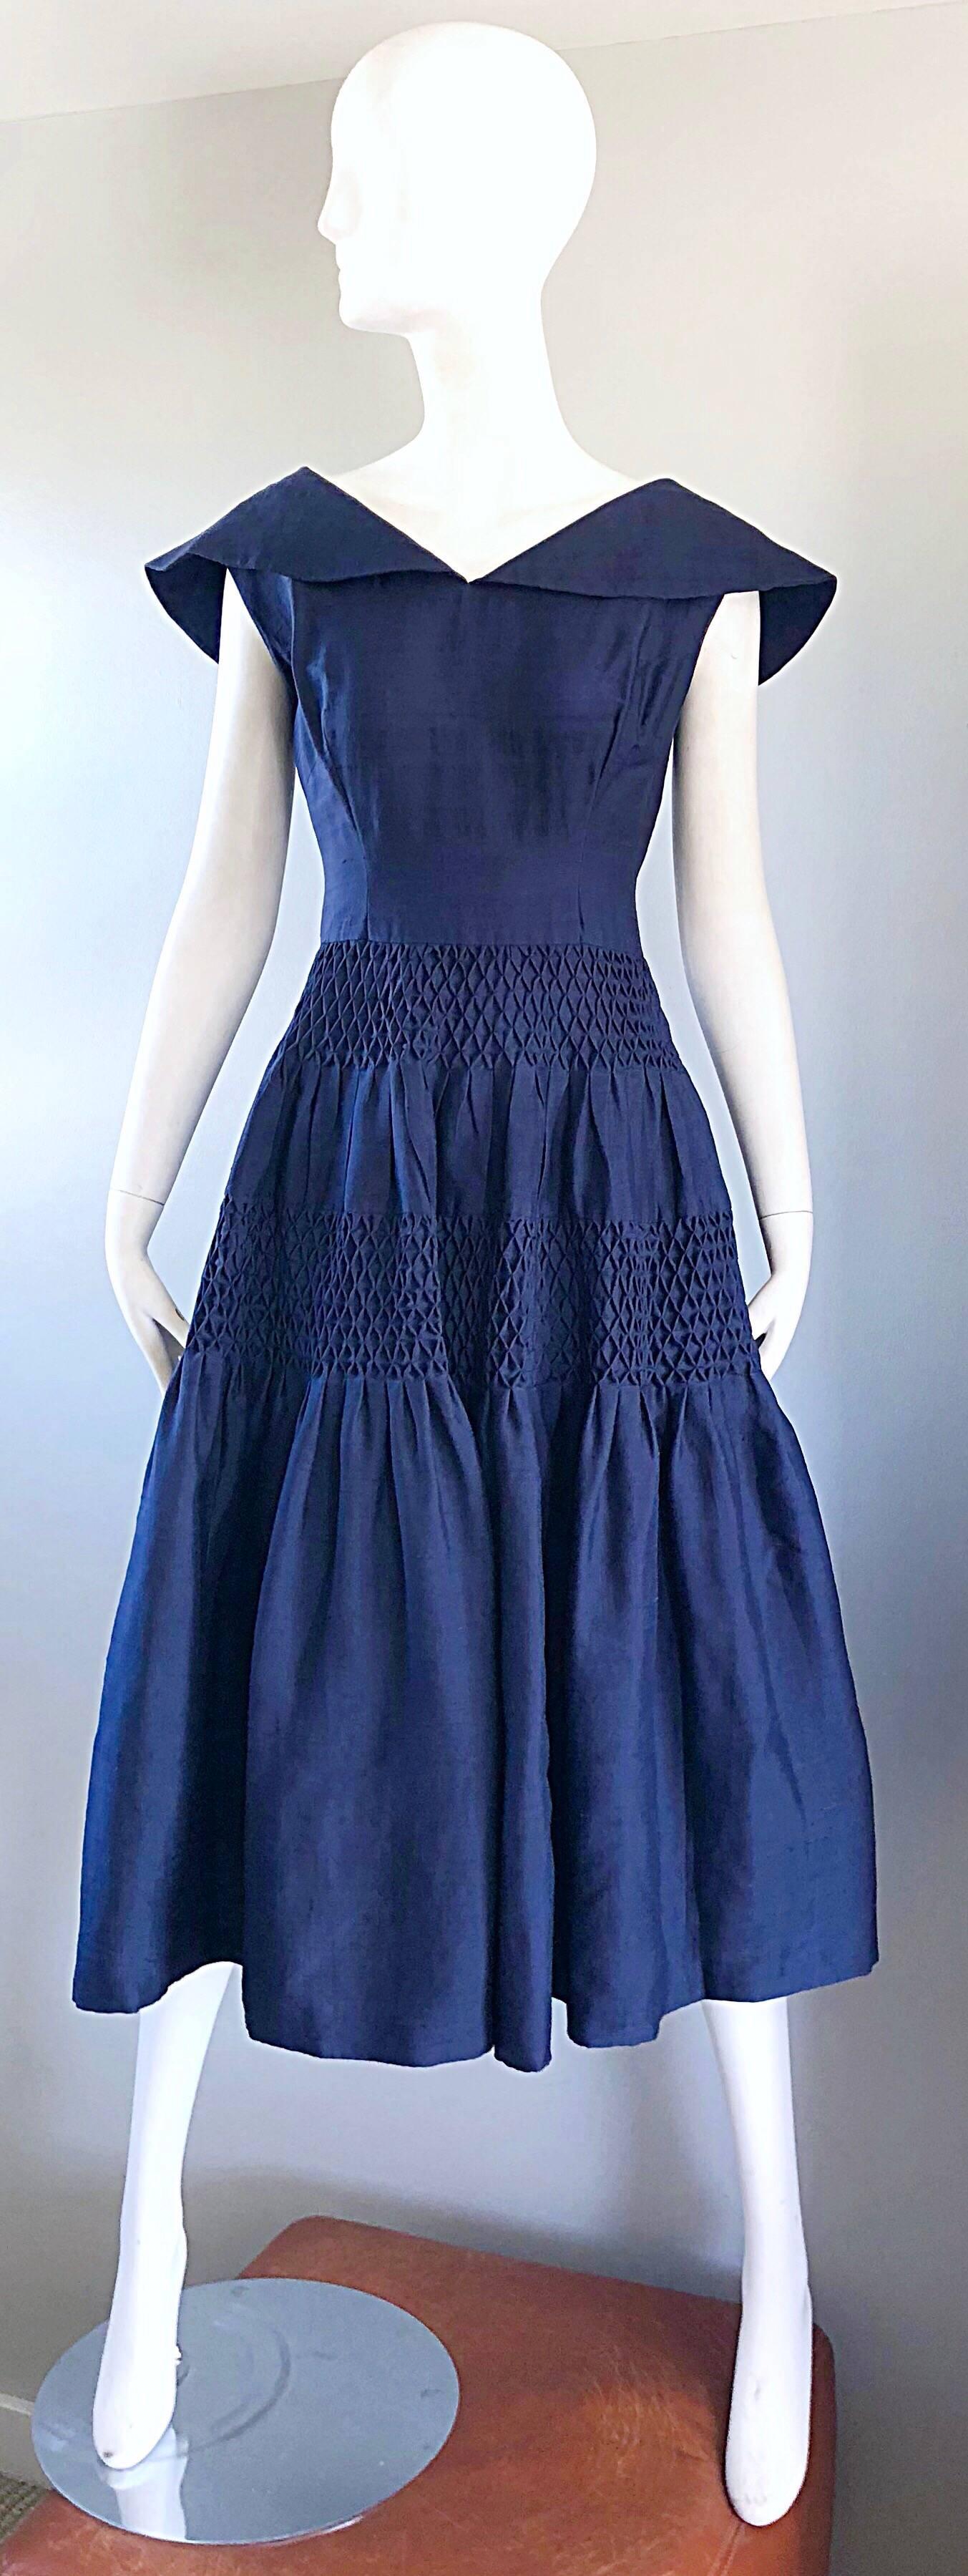 Gorgeous 1950s demi couture navy blue silk shantung nautical fit n' flare dress! Masterfully designed, with a very heavy attention to detail. Fitted bodice, with a forgiving and flattering full skirt. Shawl like collar, with ribbon bow detail on the